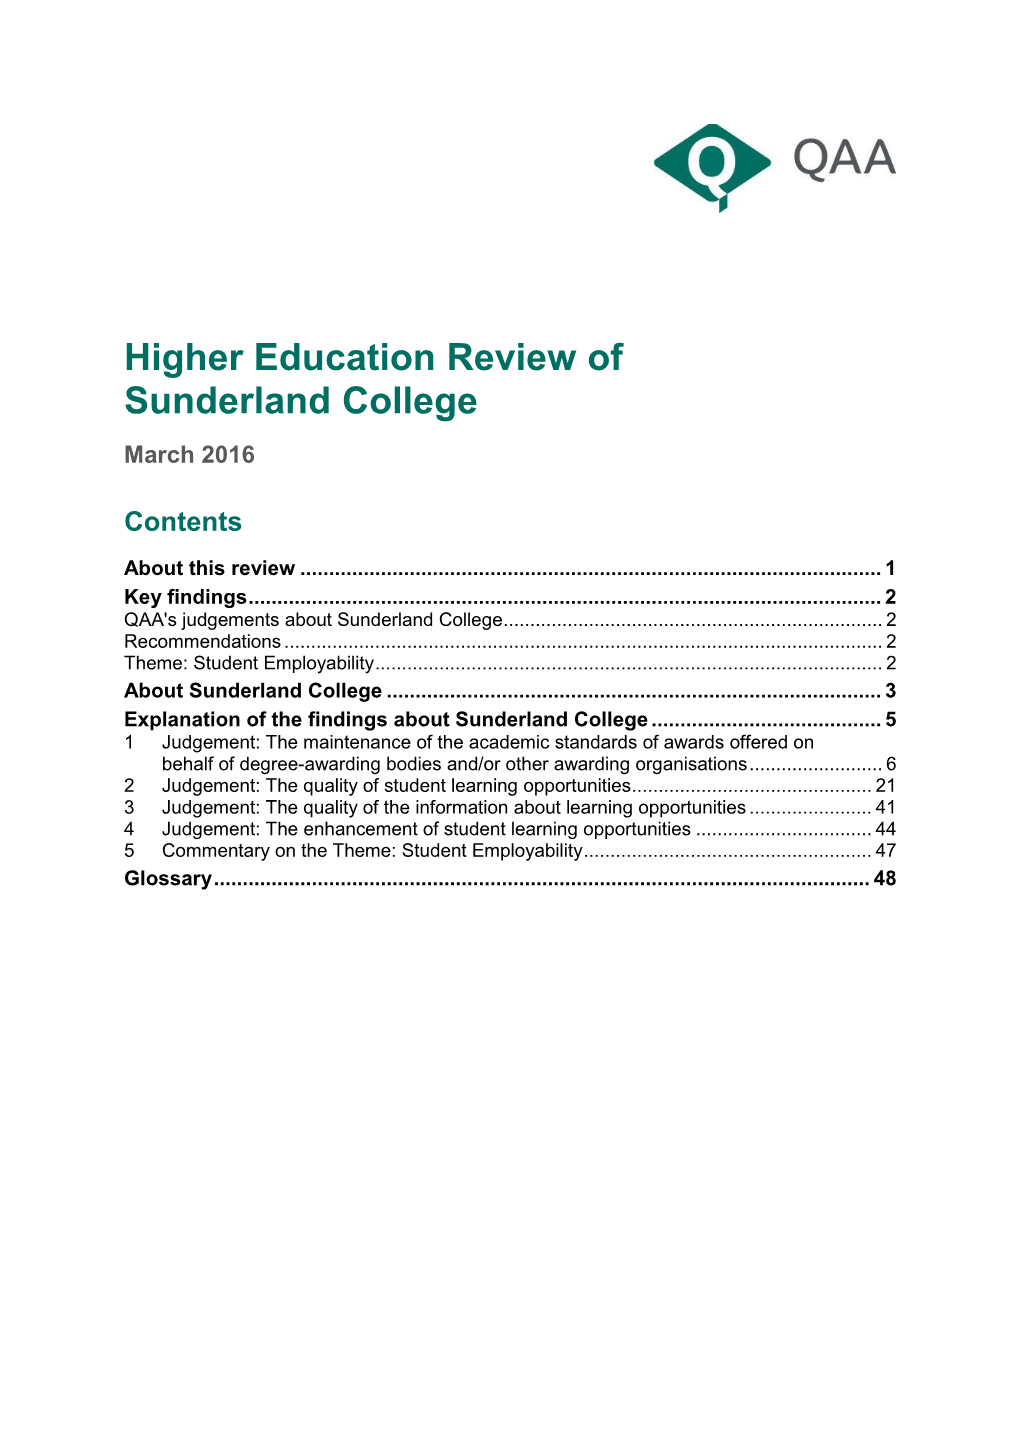 Higher Education Review of Sunderland College March 2016